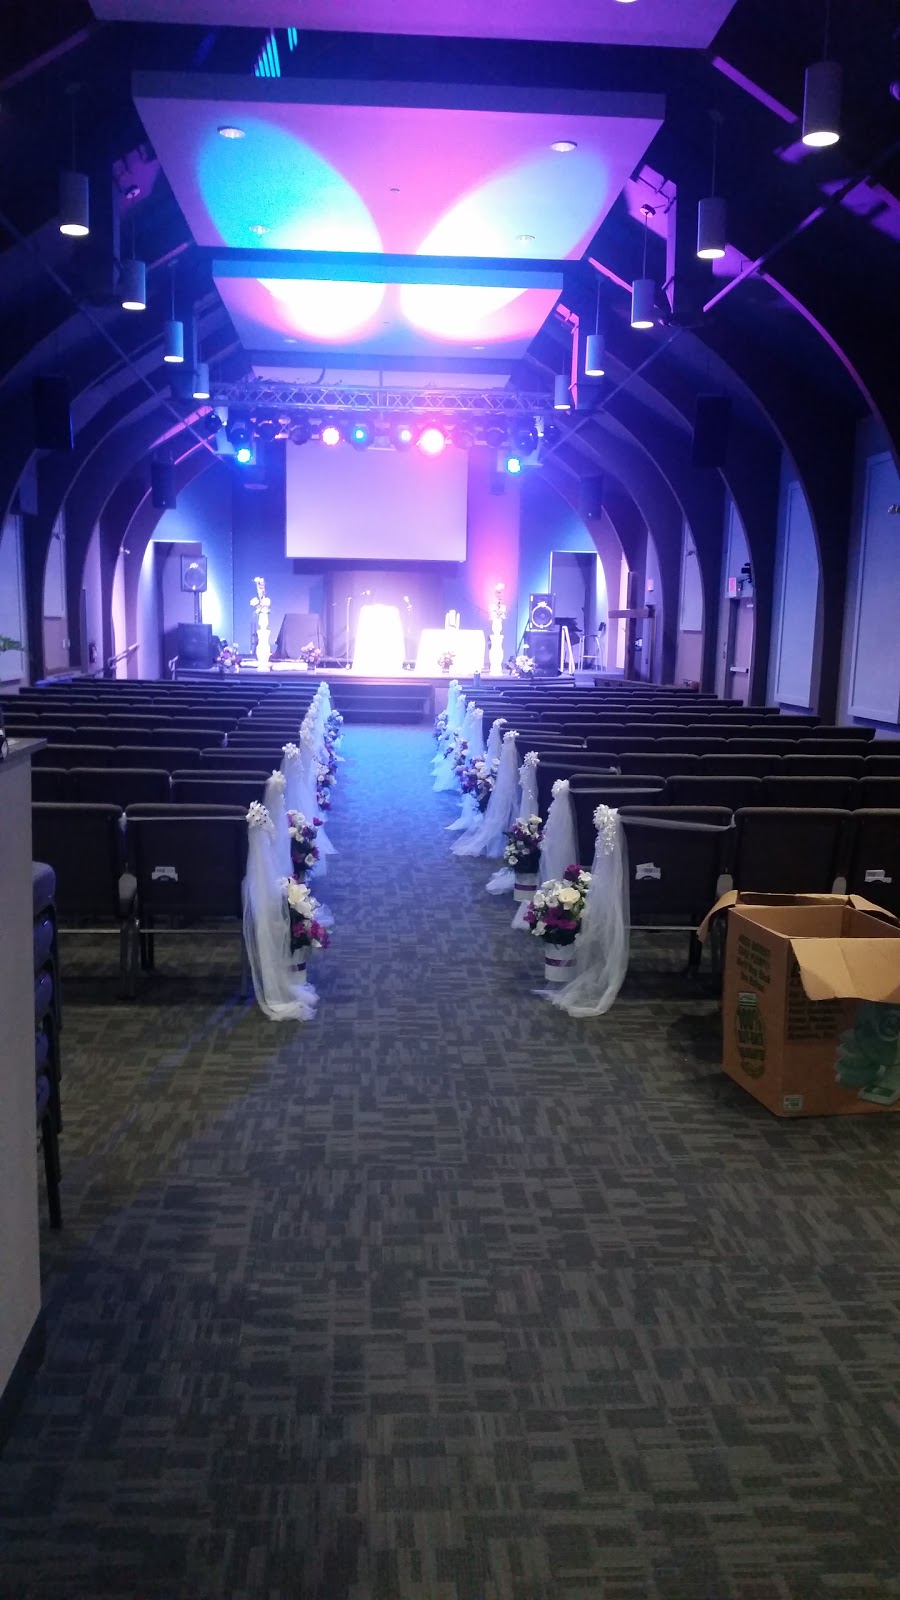 Storehouse Church | 1090 Germantown Pike, Plymouth Meeting, PA 19462 | Phone: (610) 277-1690